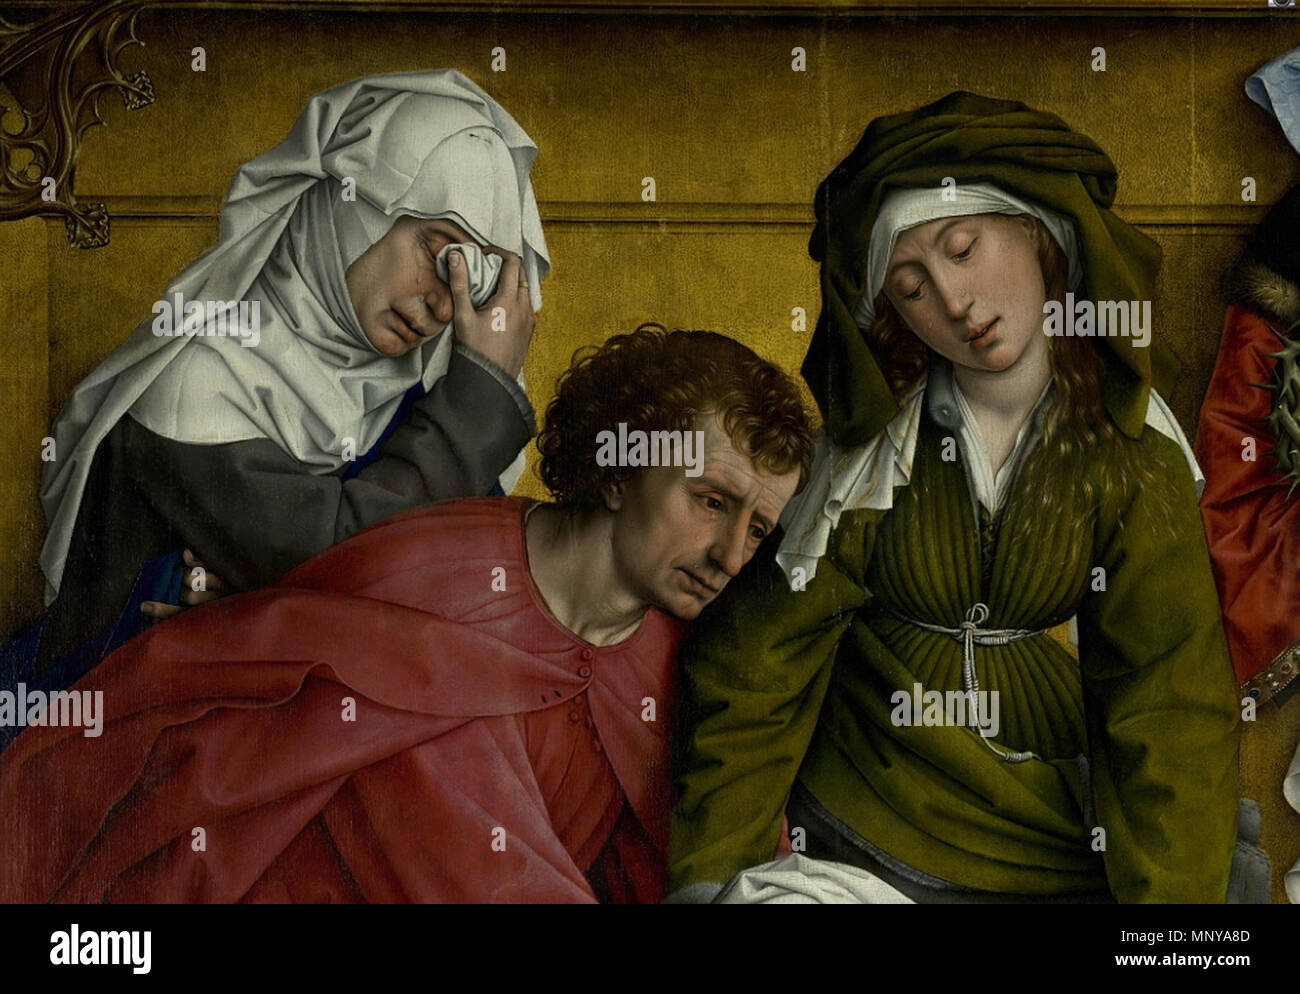 English: Descent from the Cross - Detail mourning people, left side (l.t.r. Mary of Clopas, Saint John the Evangelist and Mary Salome)    .   1256 Weyden, Rogier van der - Descent from the Cross - Detail Mary of Clopas, Saint John the Evangelist and Mary Salome Stock Photo